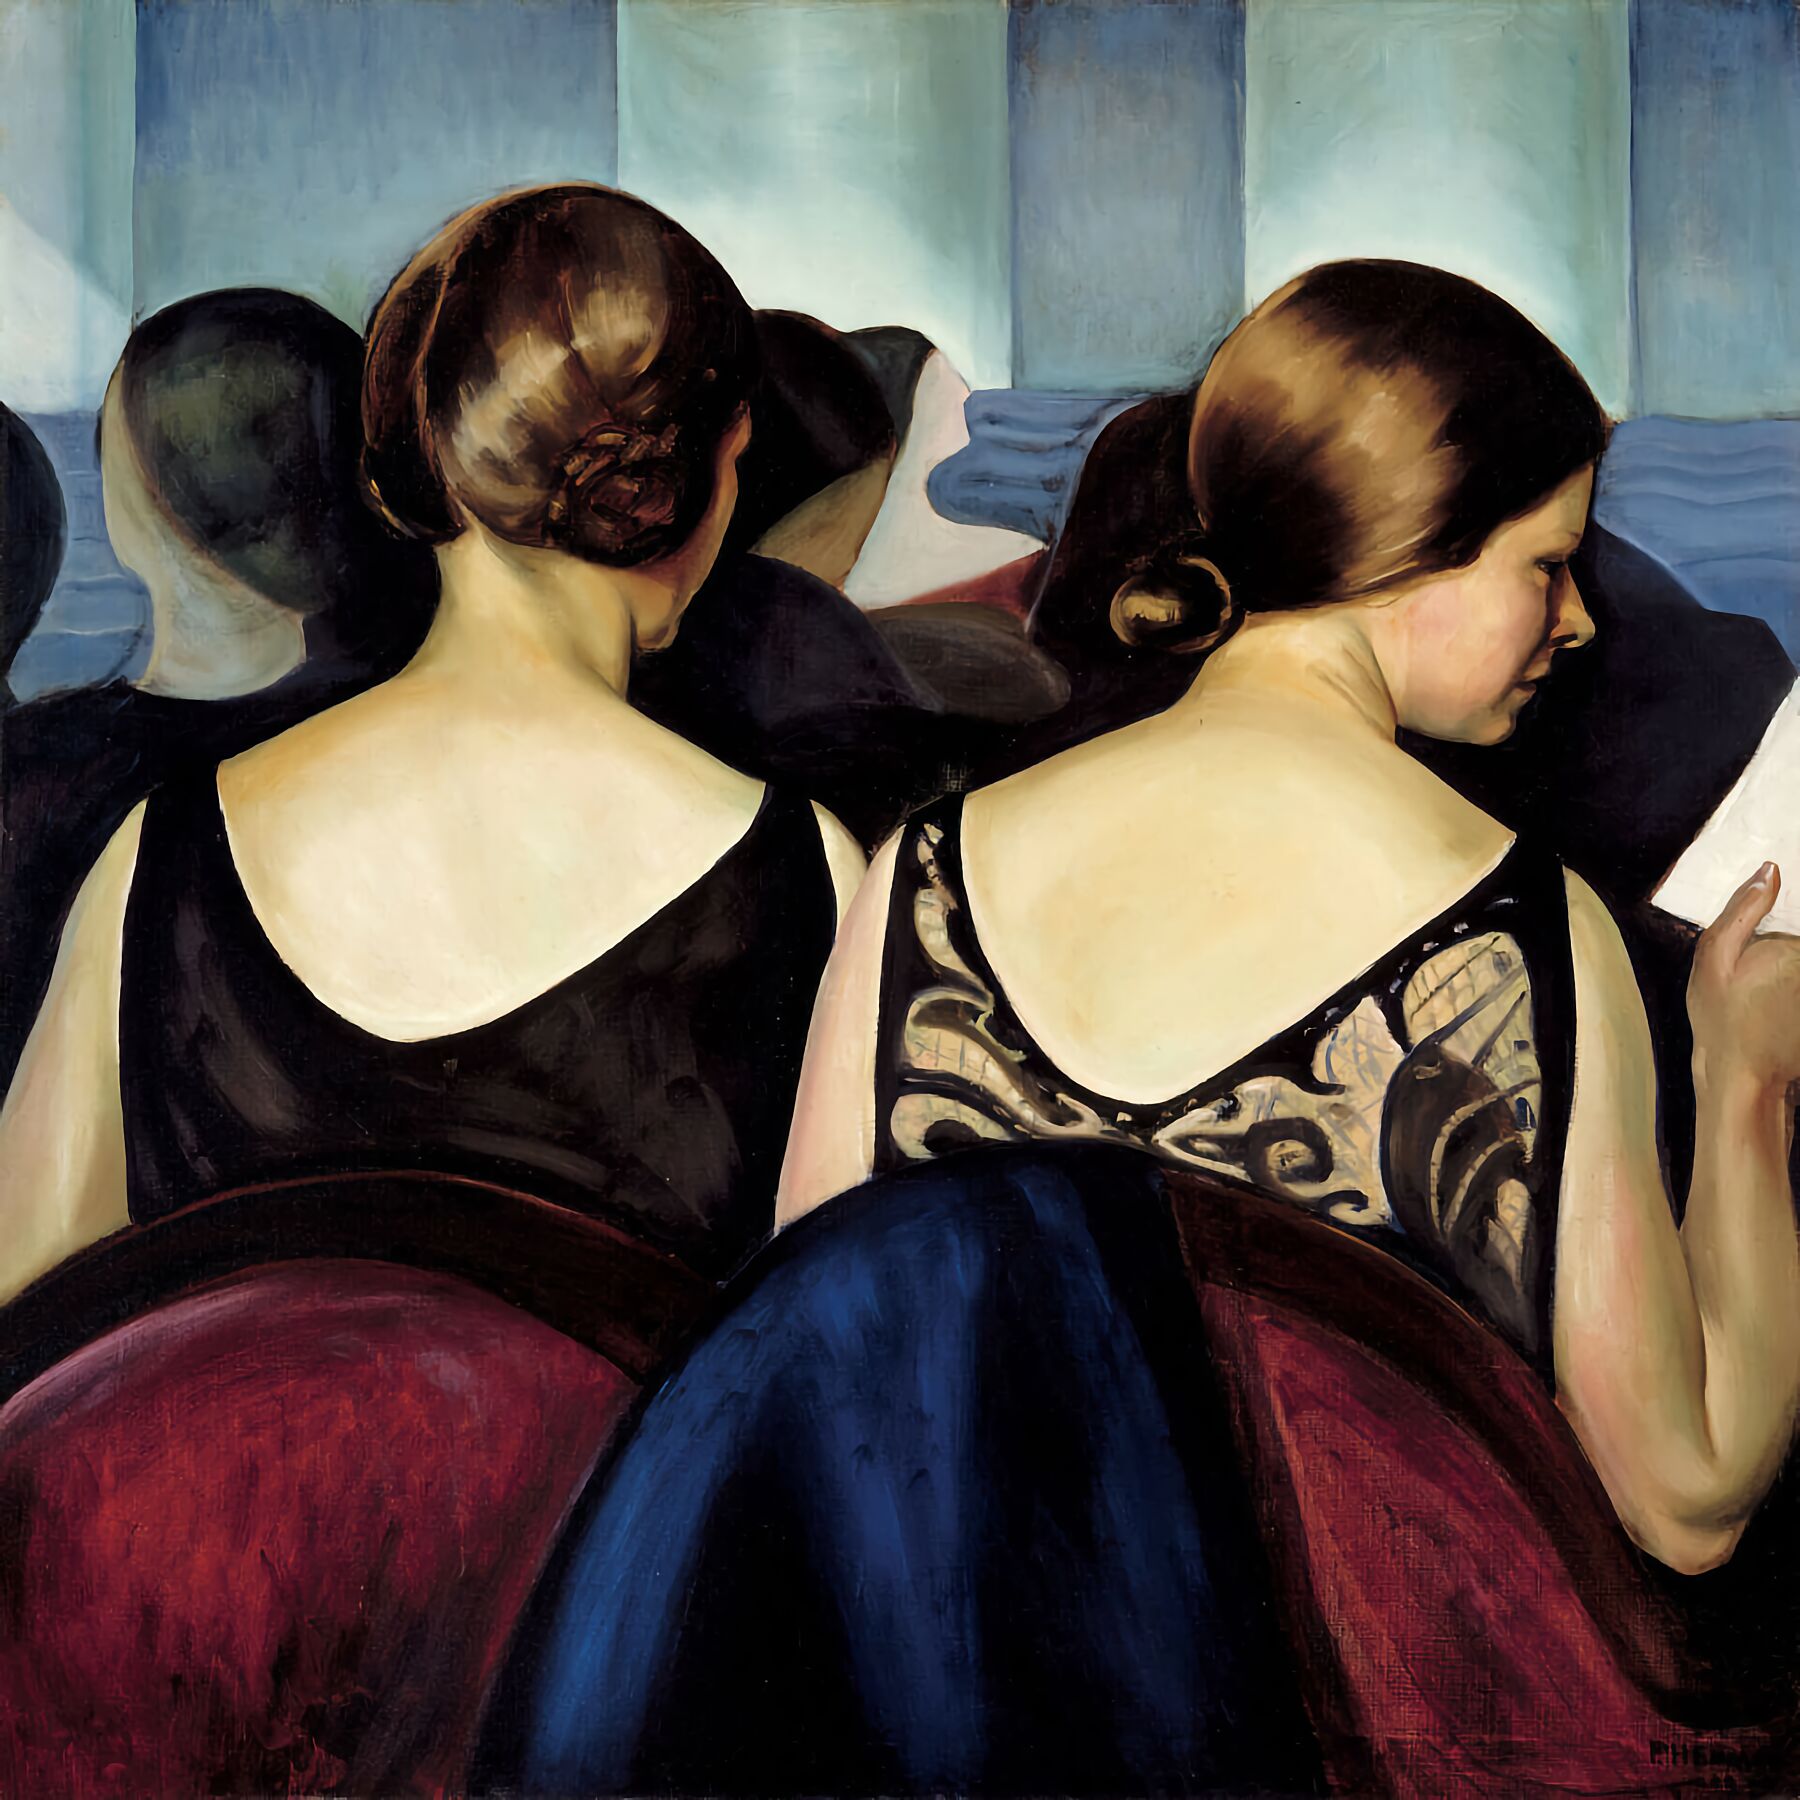  At the Theatre by Prudence Heward  1928